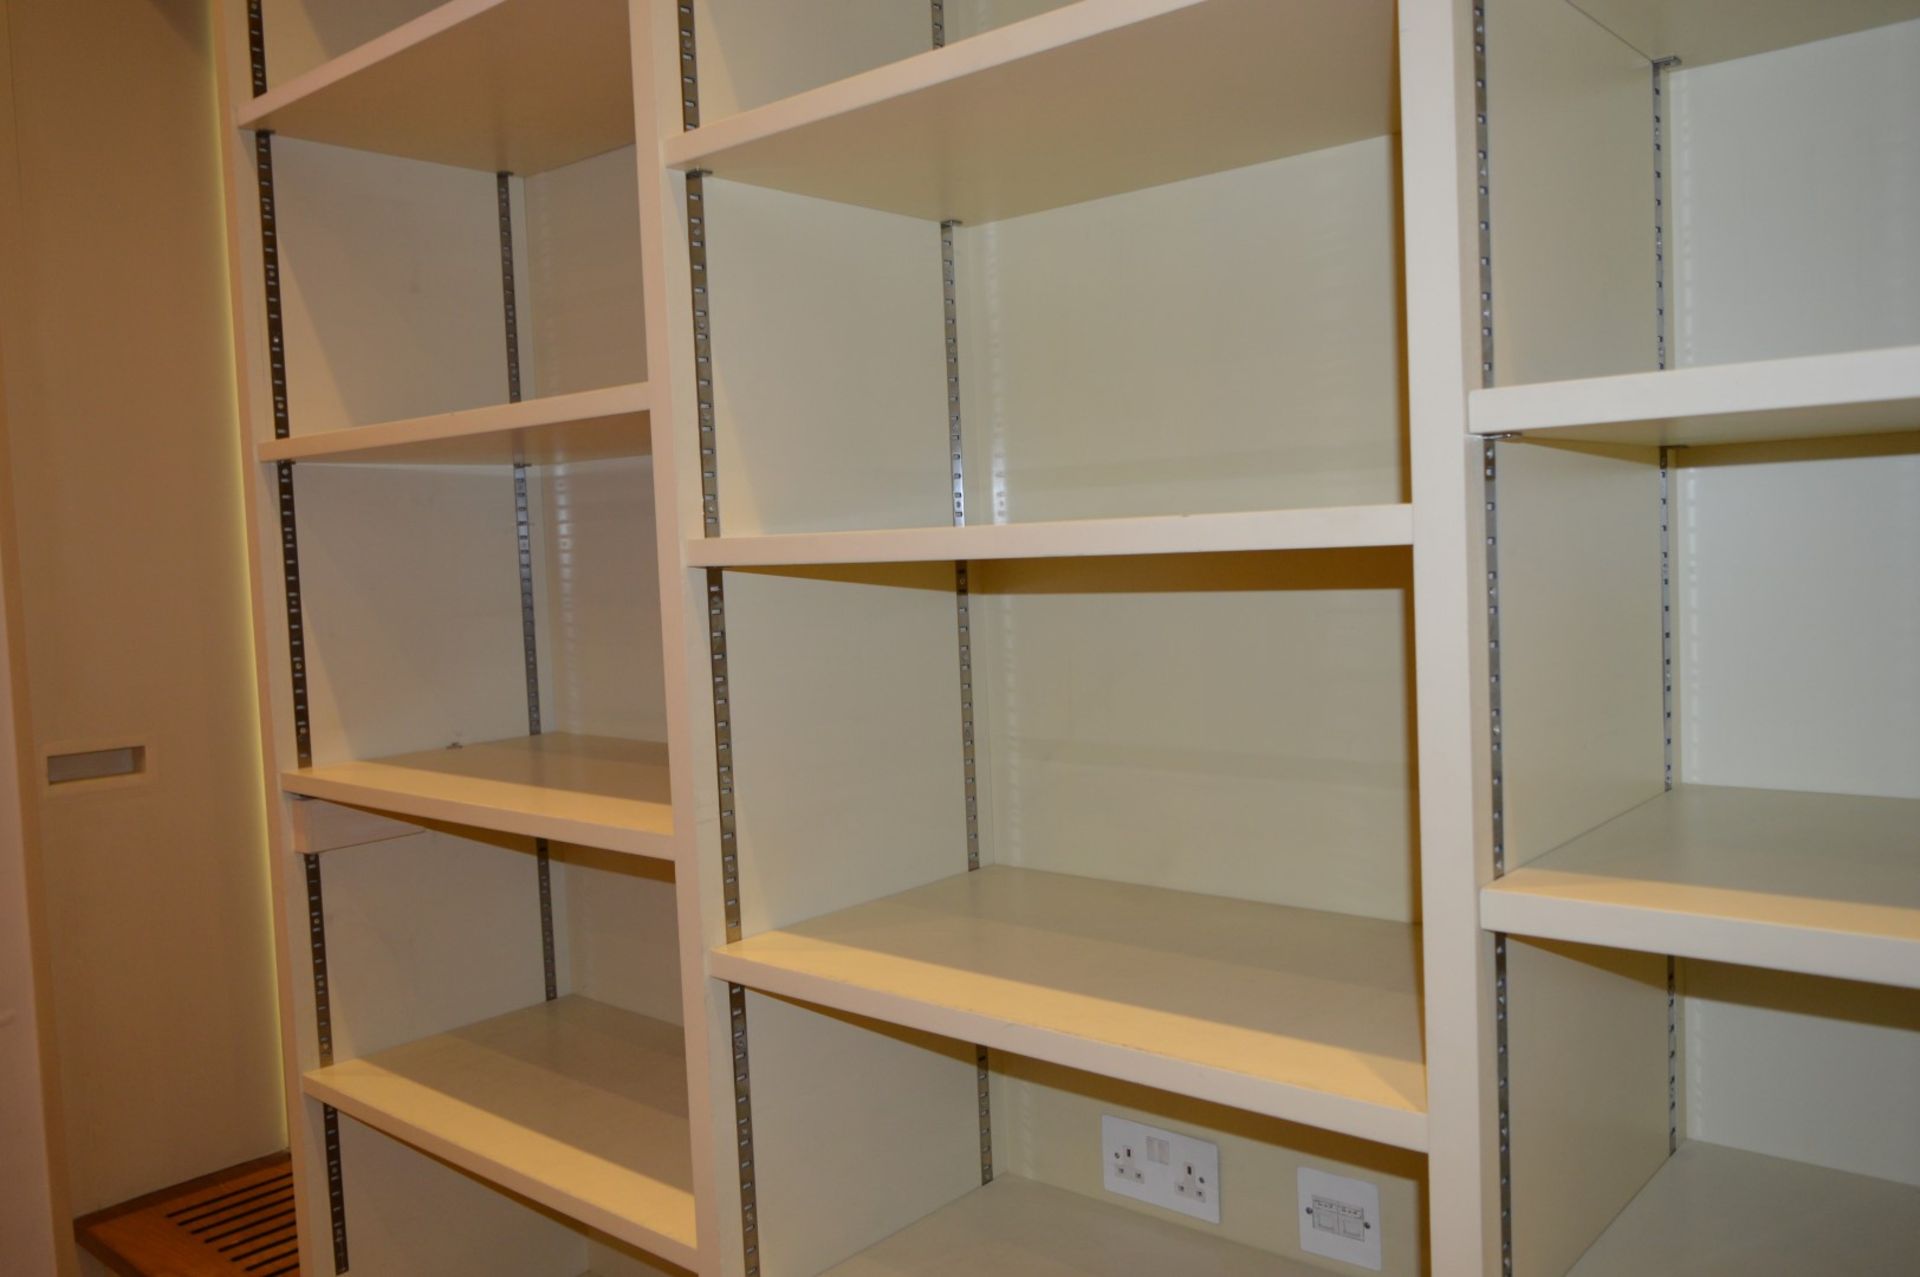 1 x Office Storage Room Including Two Sections of Adjustable Storage Shelvings and Oak Sideboard - Image 7 of 18